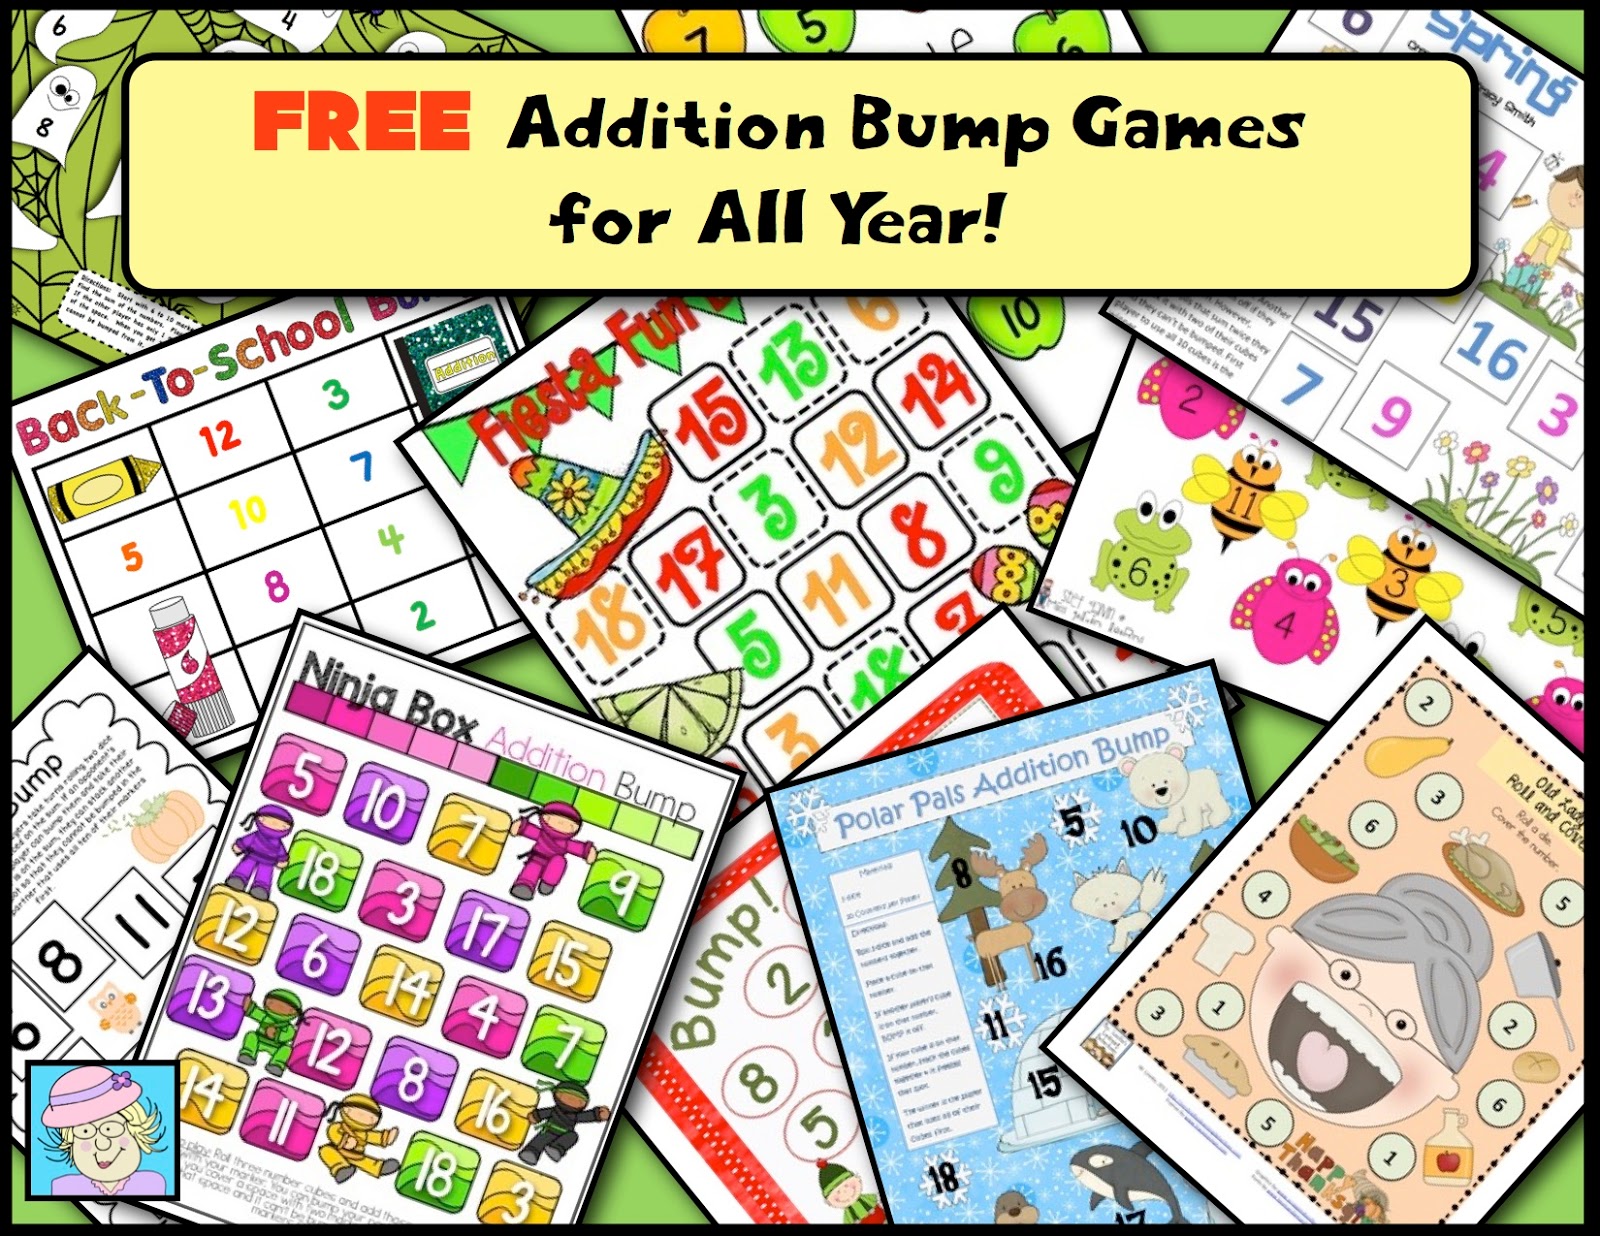 teacher-tam-s-educational-adventures-free-bump-addition-games-for-all